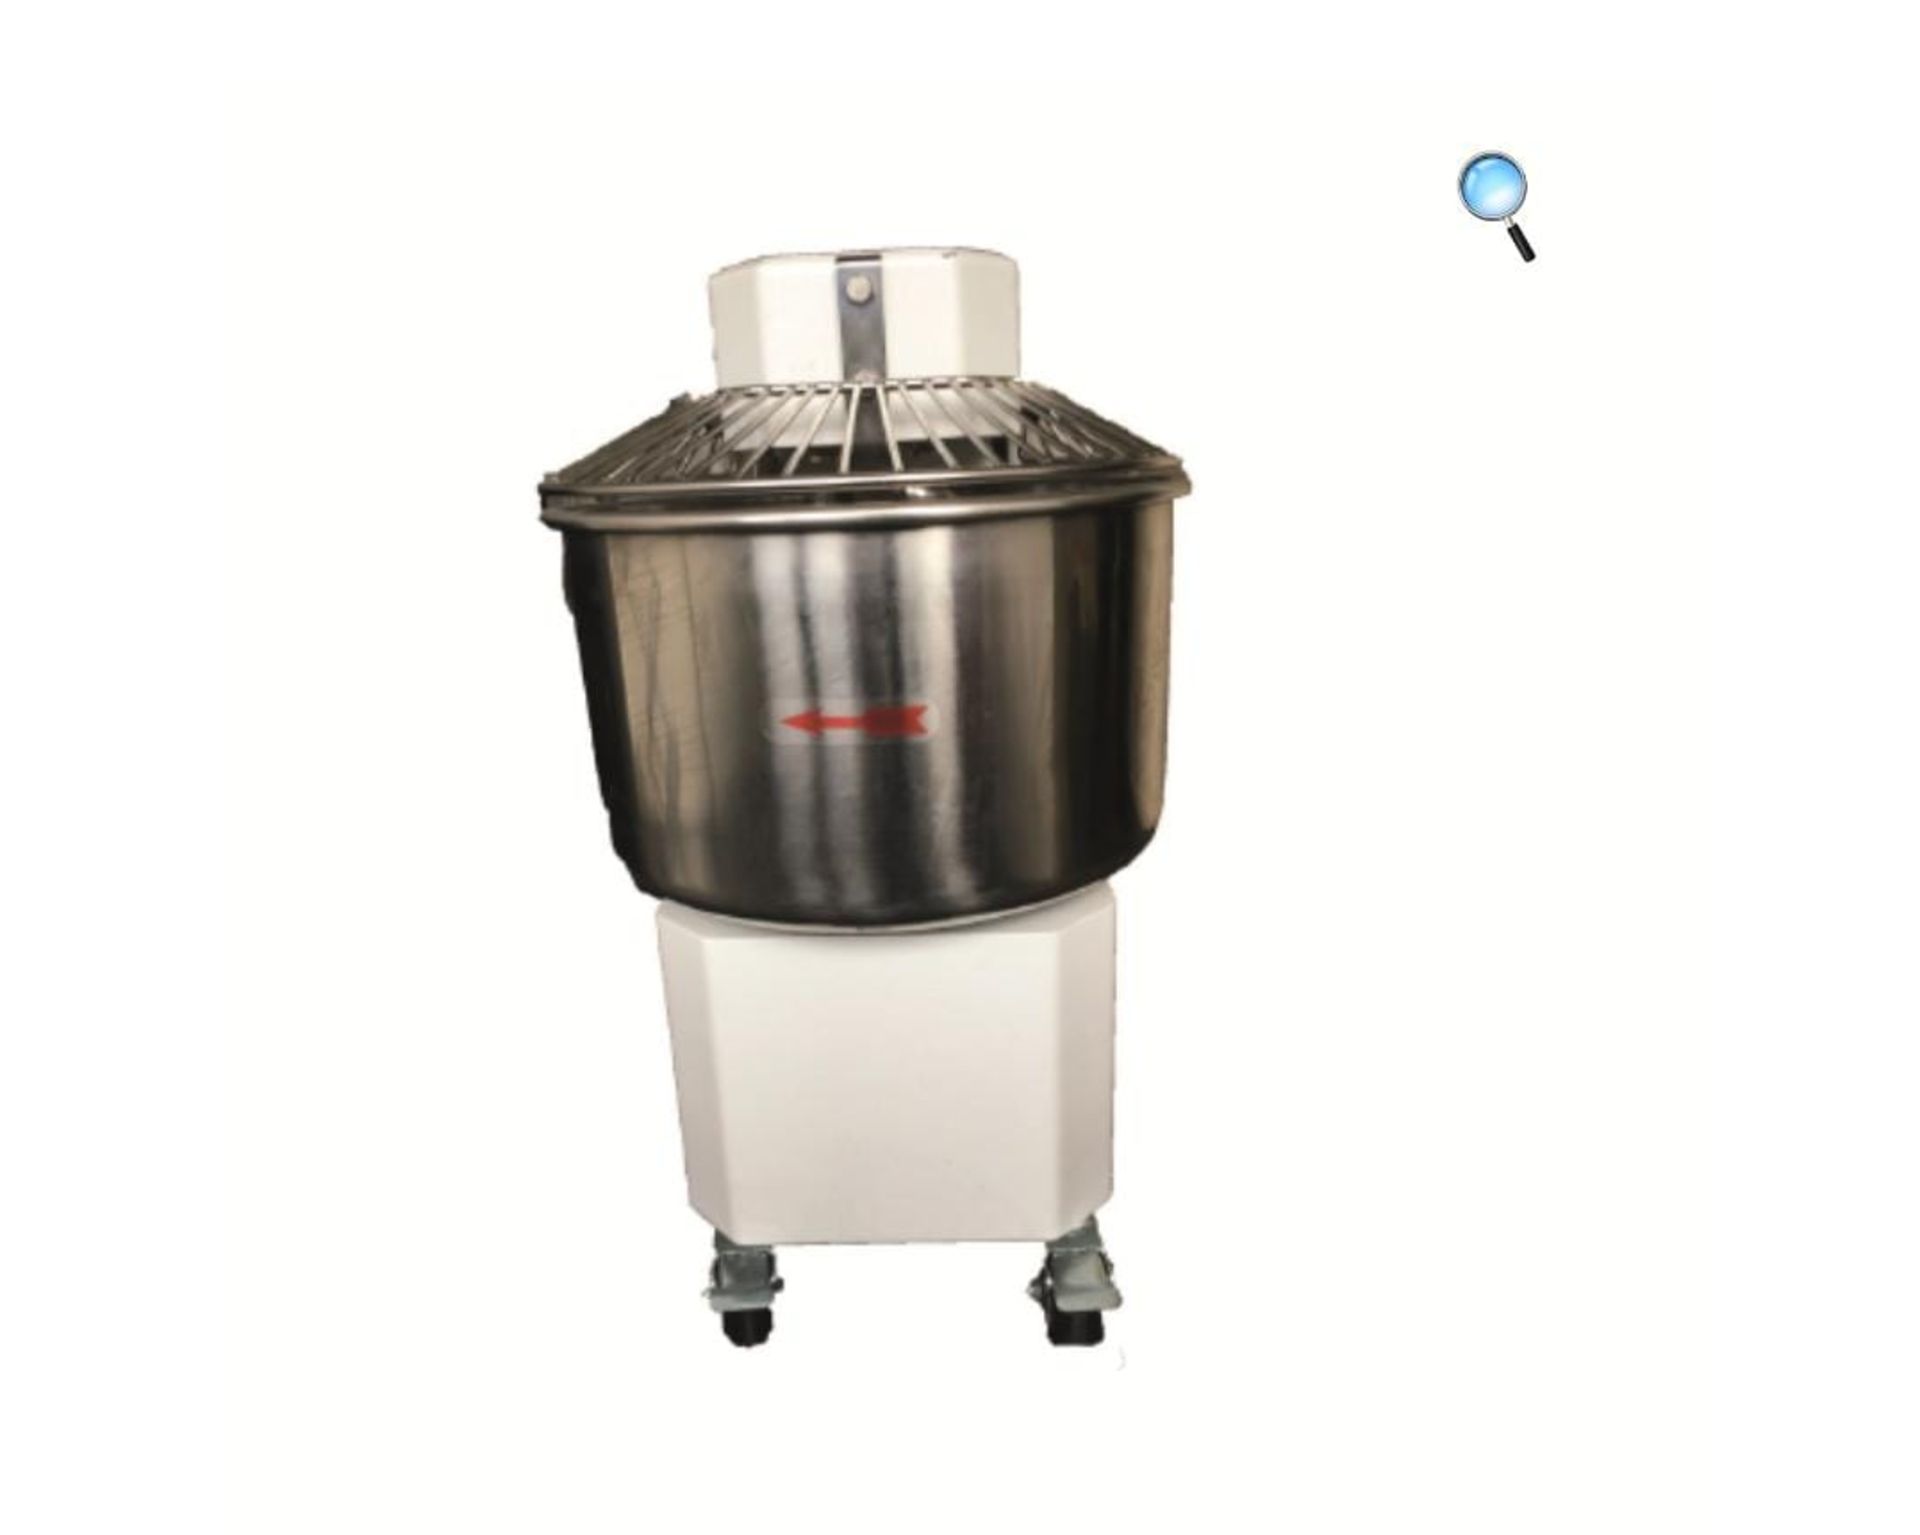 BRAND NEW 30L DOUGH MIXER SPRIAL - ITALIAN MADE - STILL IN BOX - 13 AMP UK PLUG - Image 2 of 6